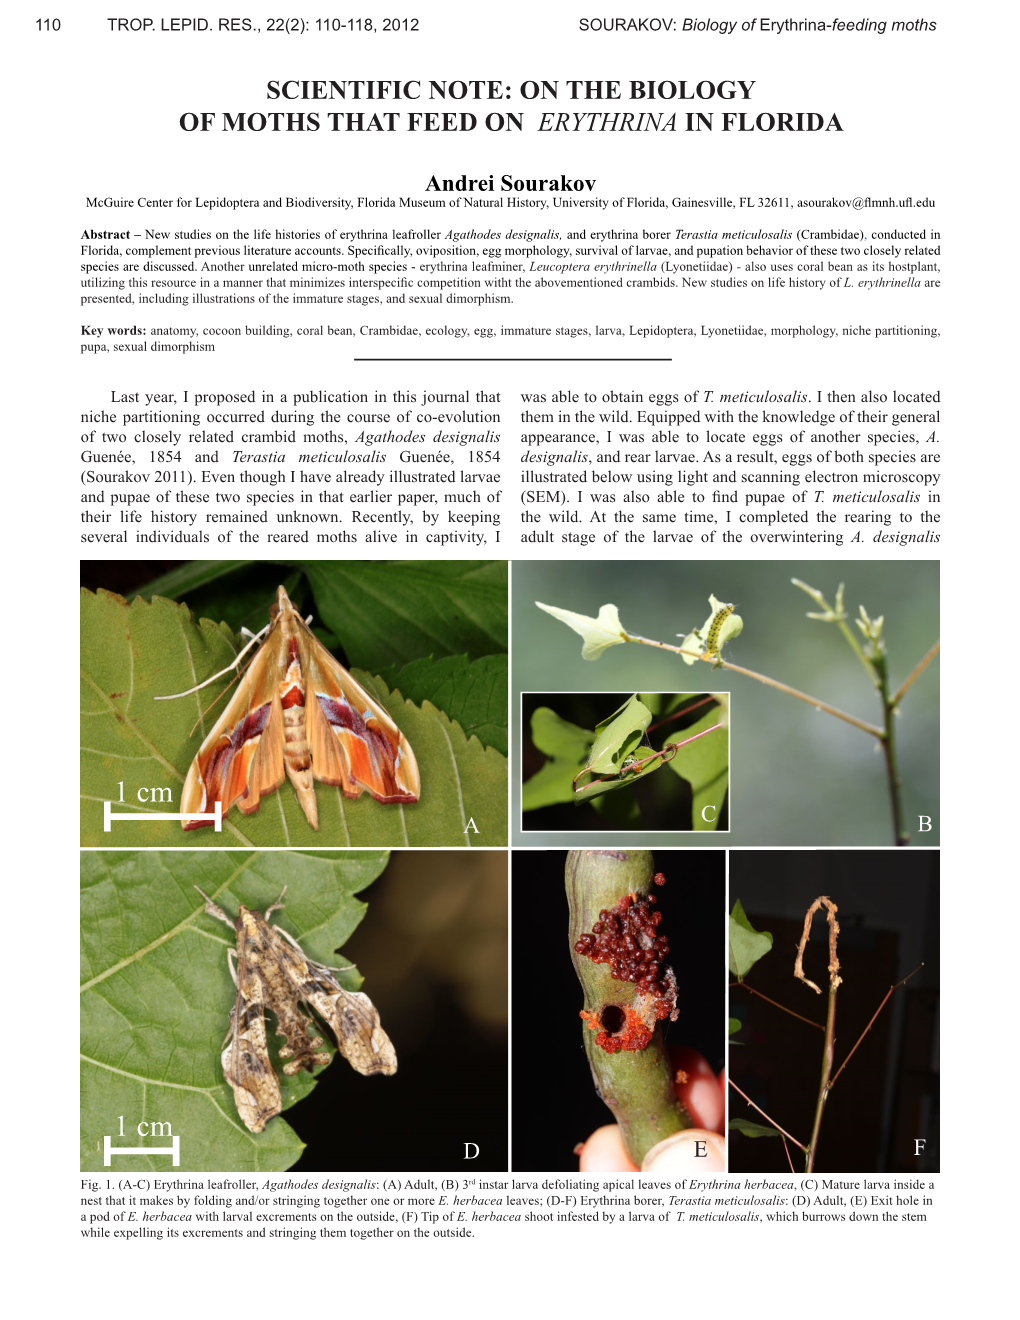 Scientific Note: on the Biology of Moths That Feed on Erythrina in Florida